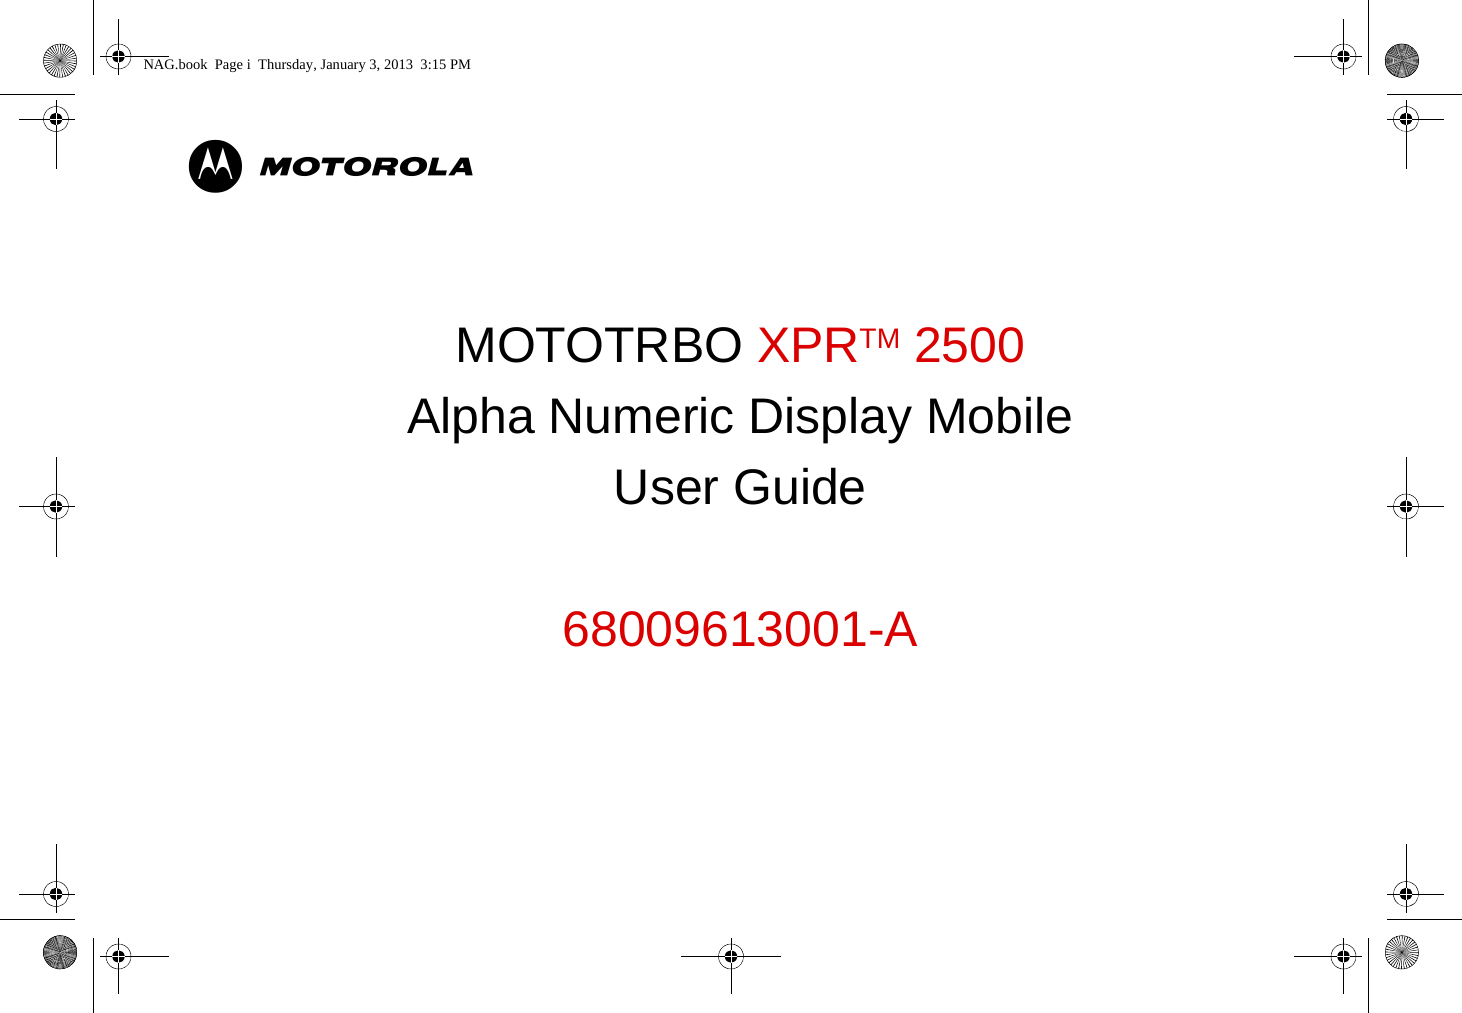 MMOTOTRBO XPRTM 2500Alpha Numeric Display MobileUser Guide68009613001-ANAG.book  Page i  Thursday, January 3, 2013  3:15 PM